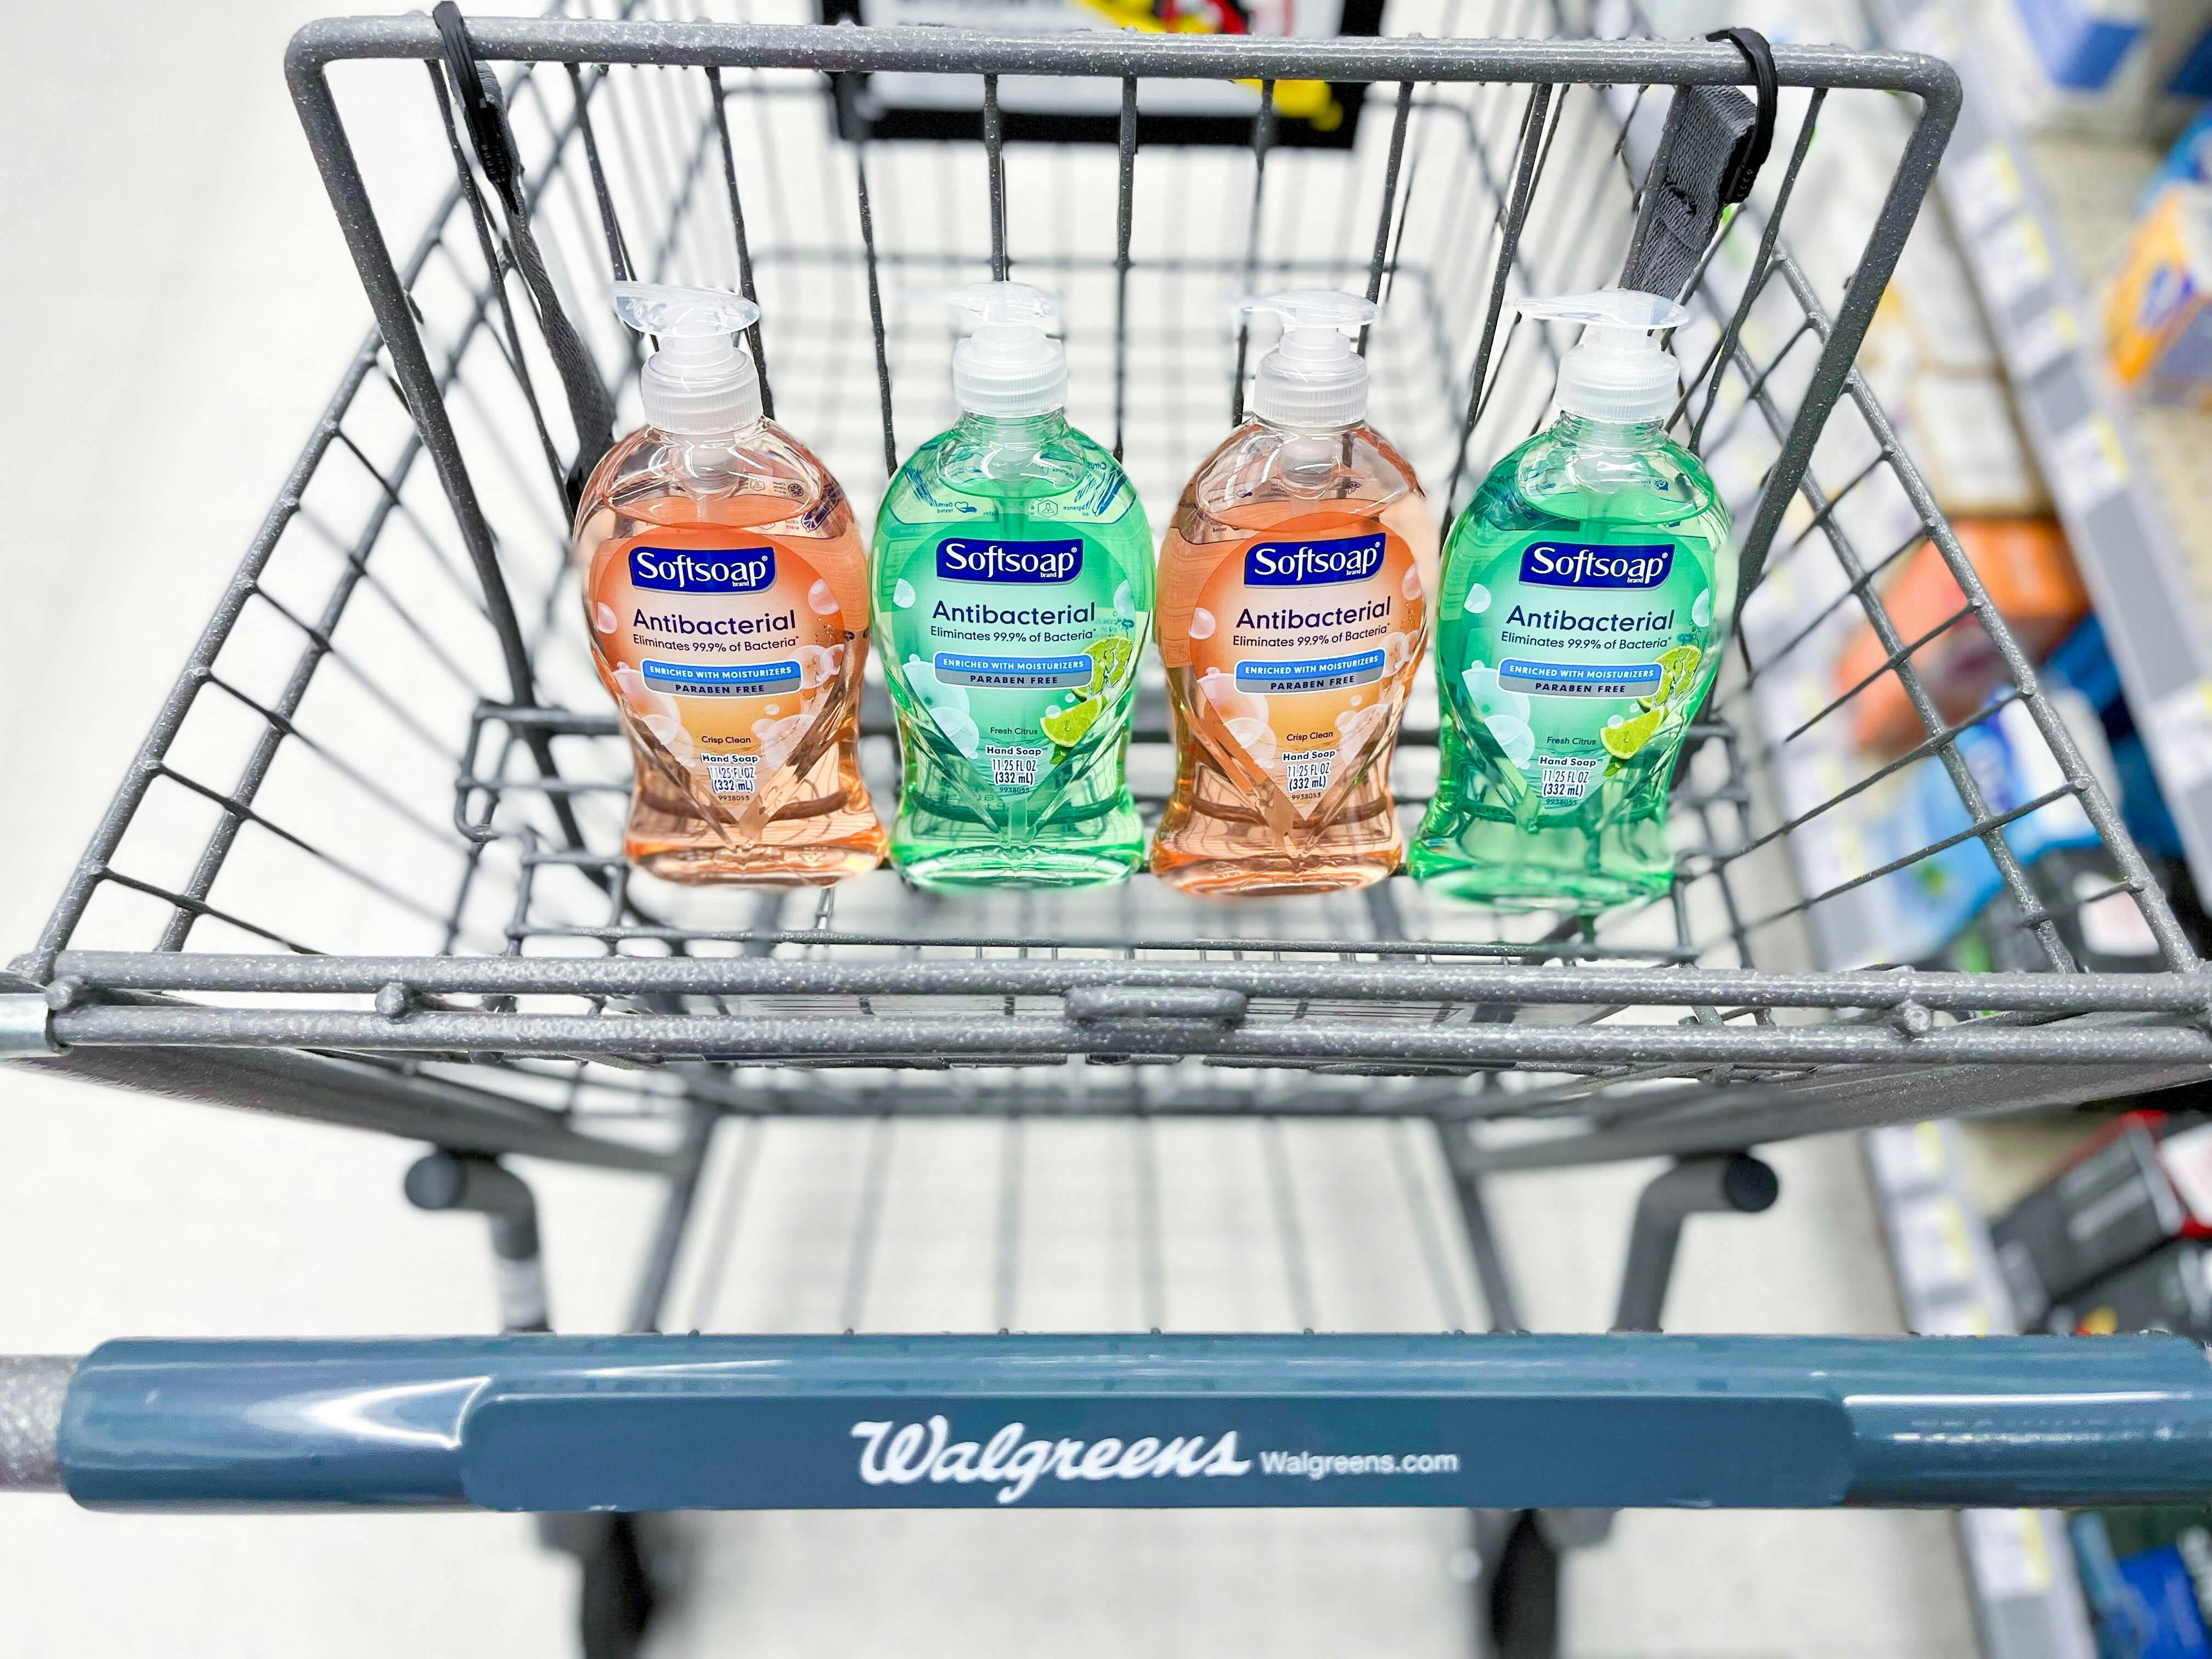 four bottles of Softsoap hand soap sitting in the basket portion of a Walgreens cart